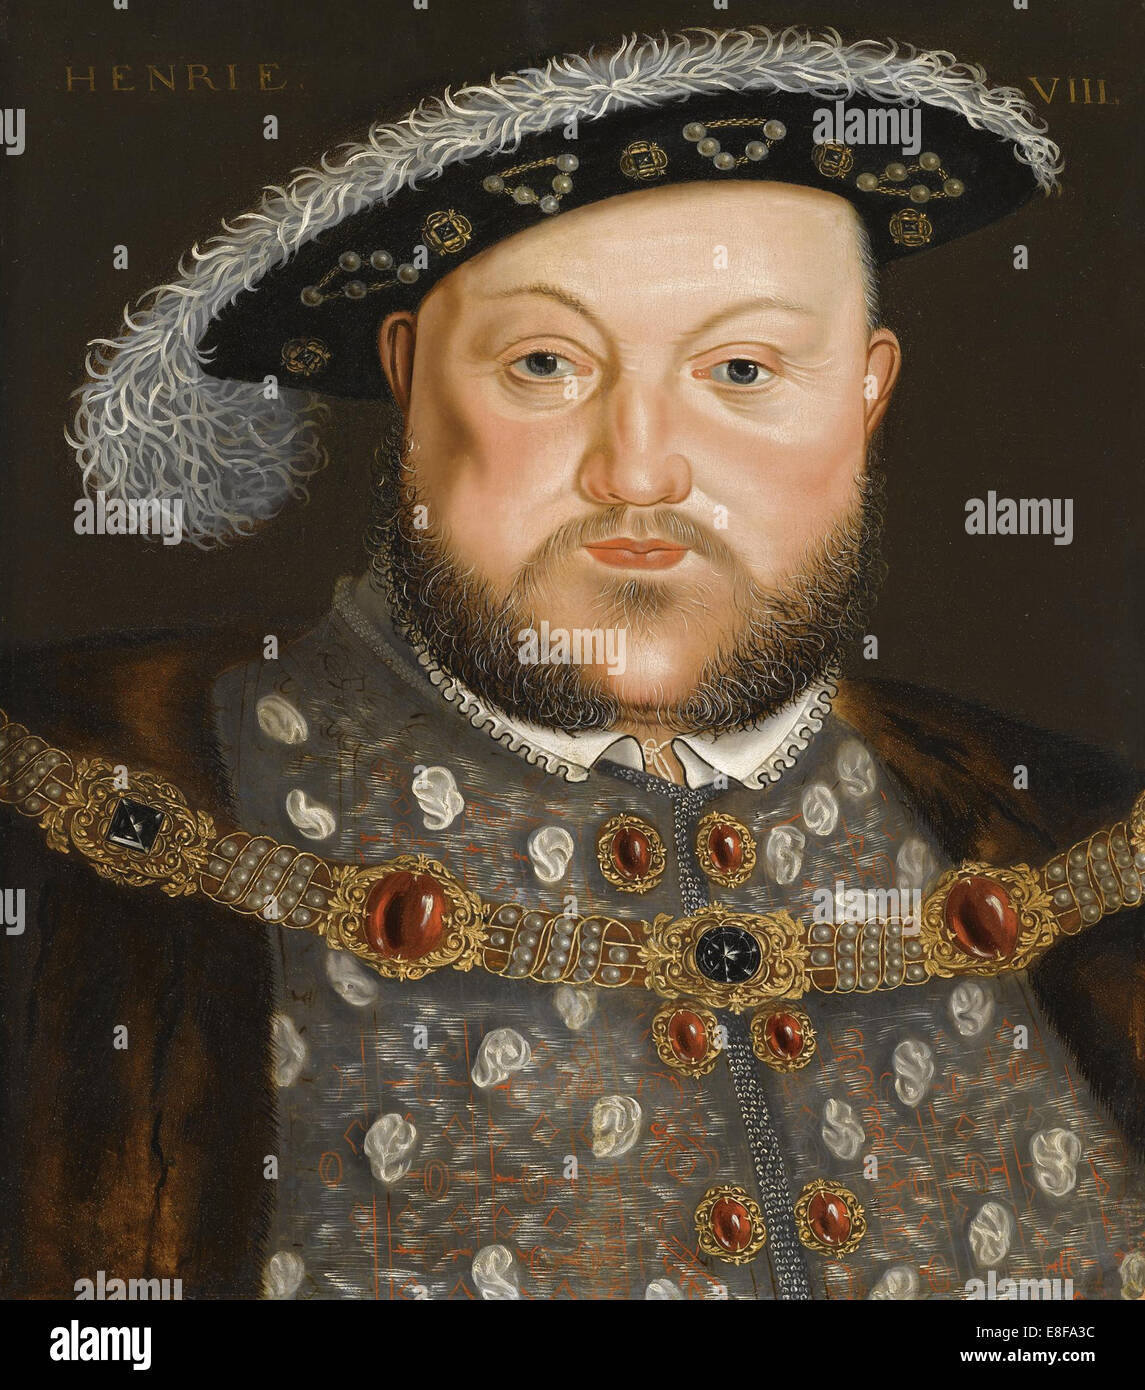 Portrait of King Henry VIII of England. Artist: Holbein, Hans, (Circle of) Stock Photo